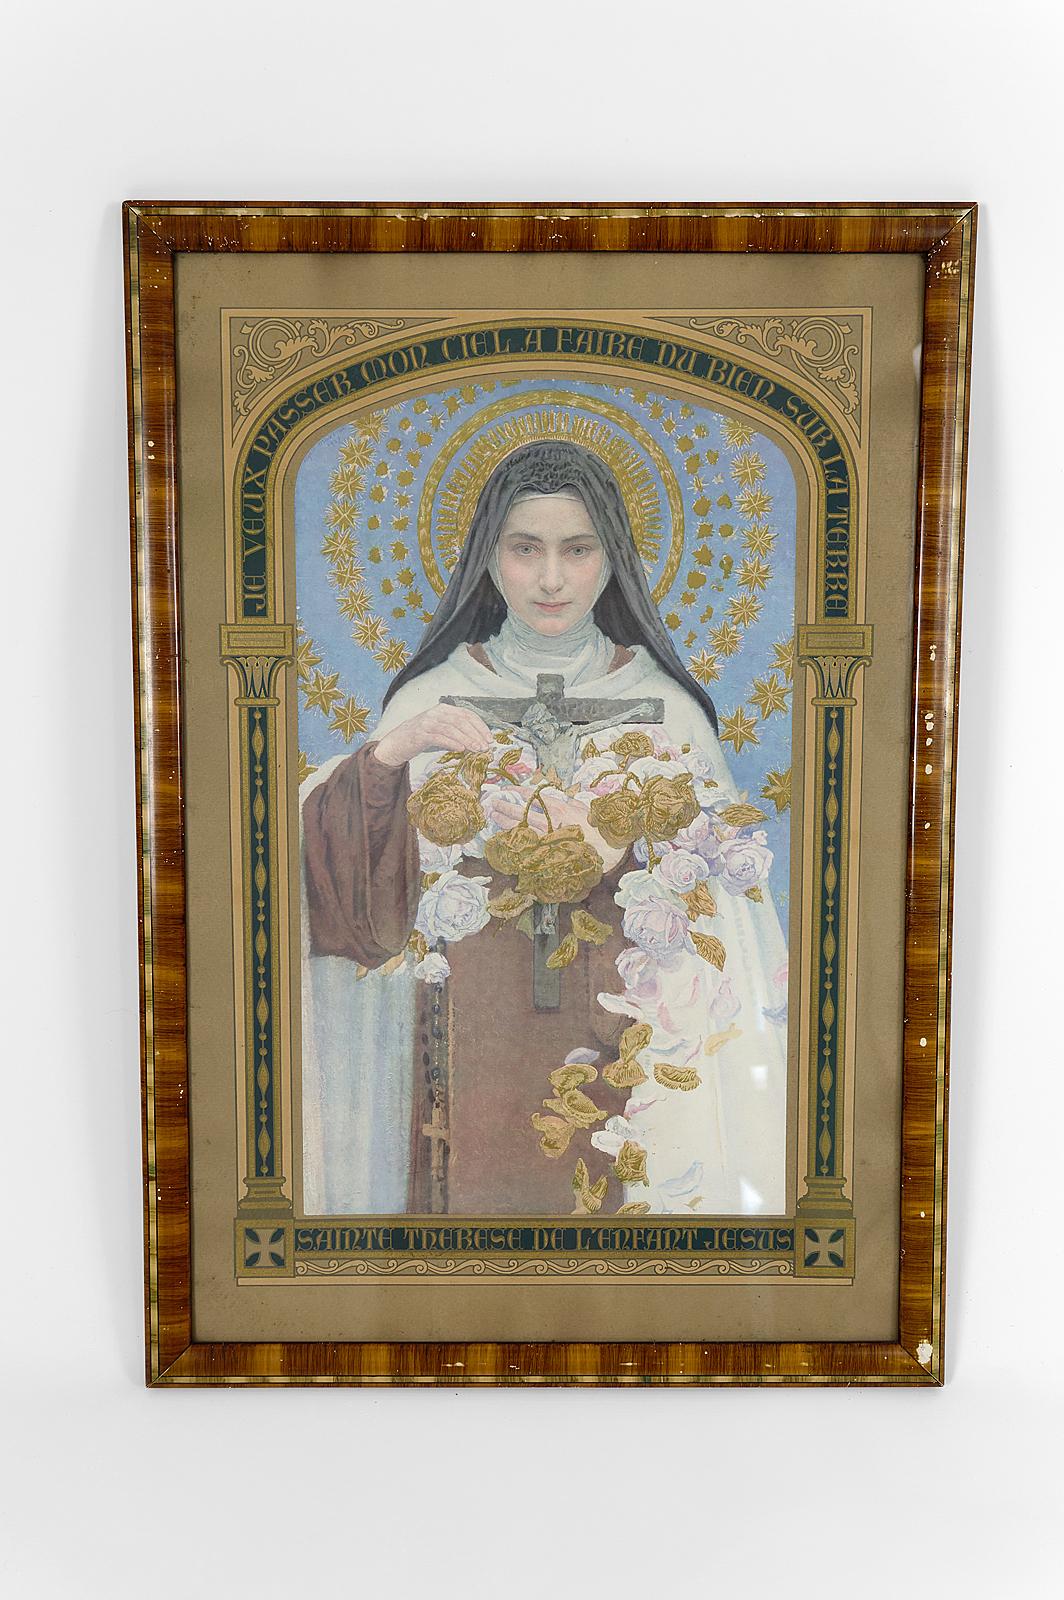 Superb lithograph under frame on the theme of Christianity depicting a nun in Carmelite dress, haloed, holding in her hands a crucified Christ and a bouquet of white and golden roses. A rosary is also visible on the left.

The portrait is framed